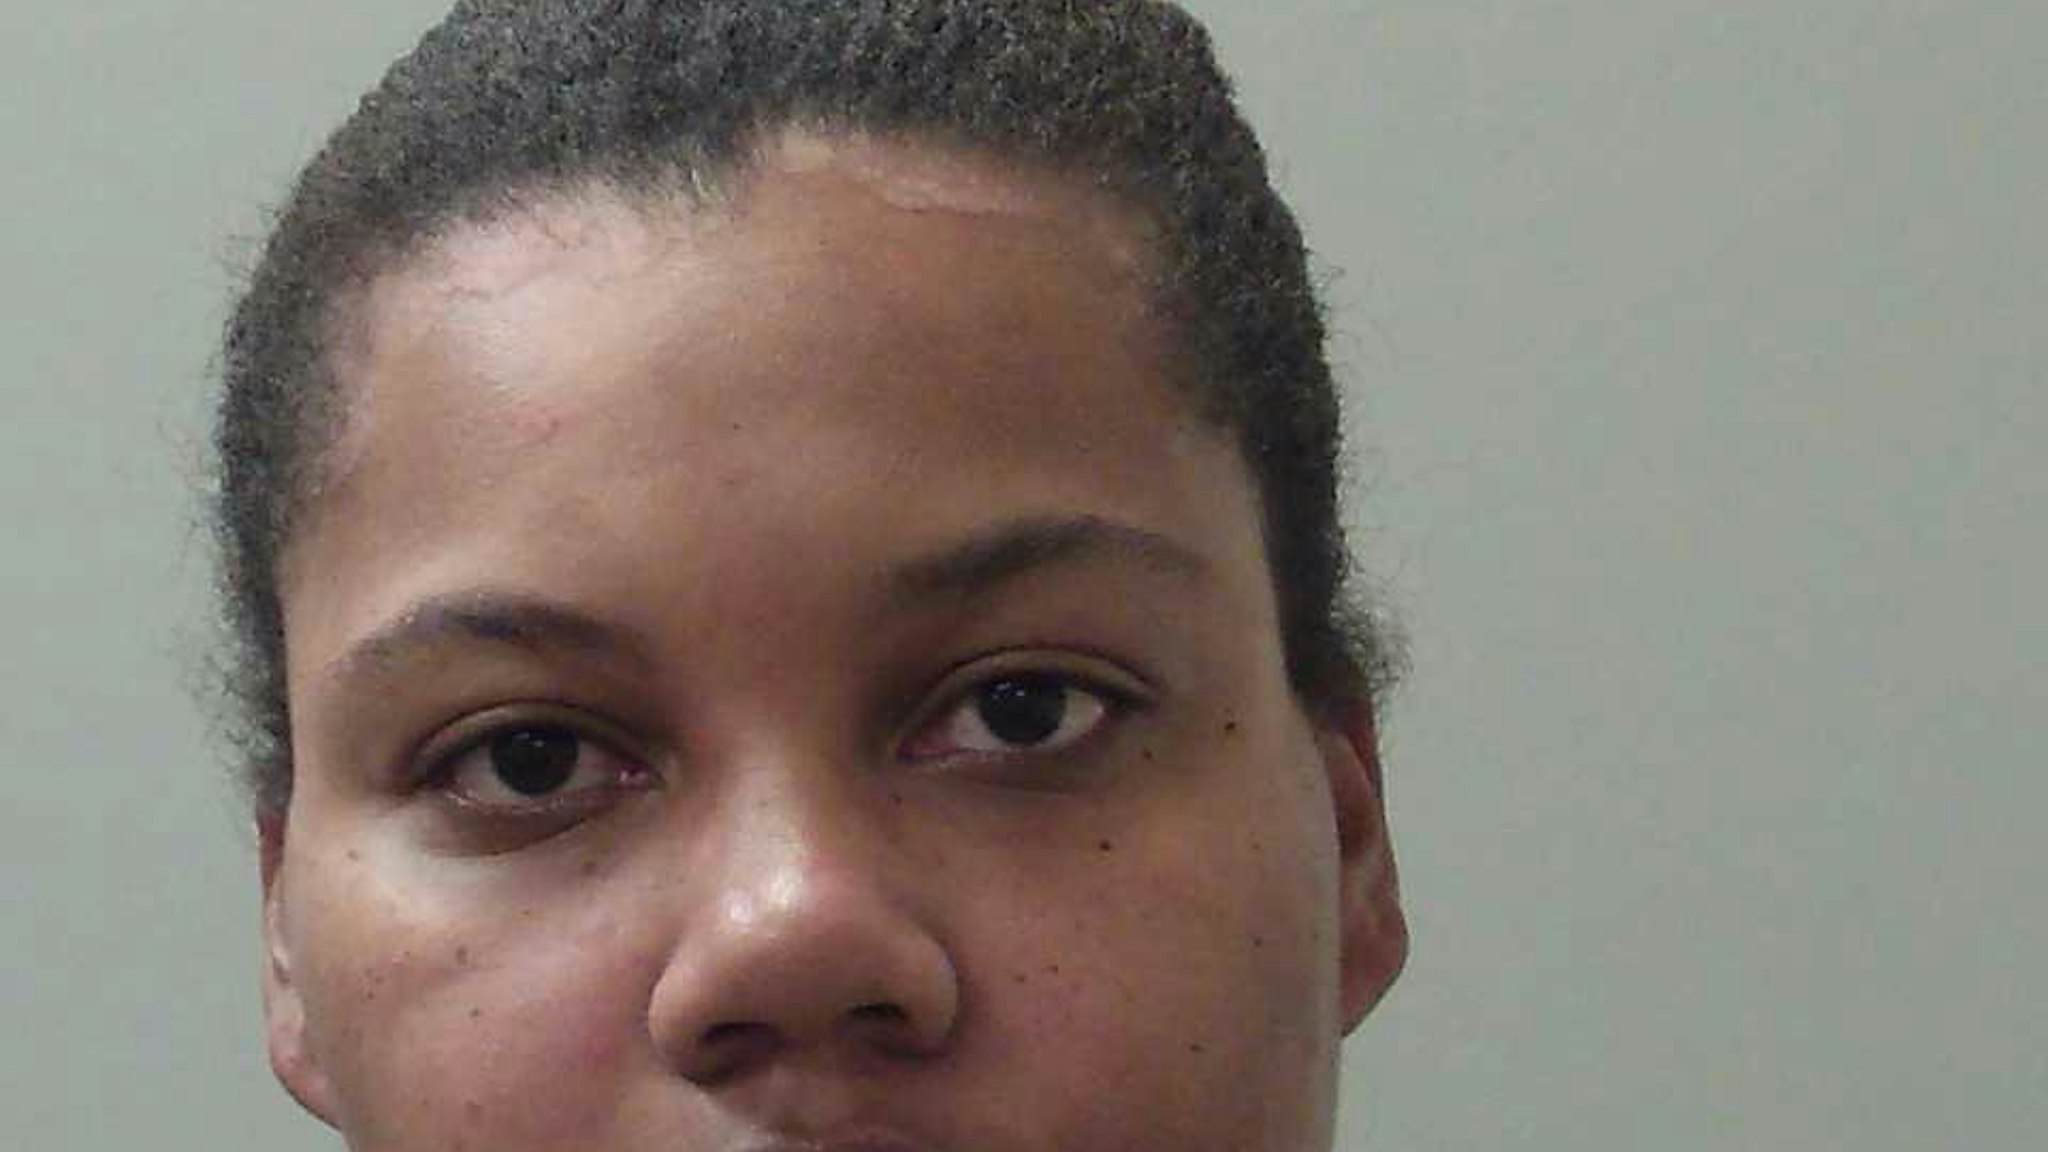 Amanda Shantay Williams, 30, pleaded guilty to sexually abusing a 13-year-old boy